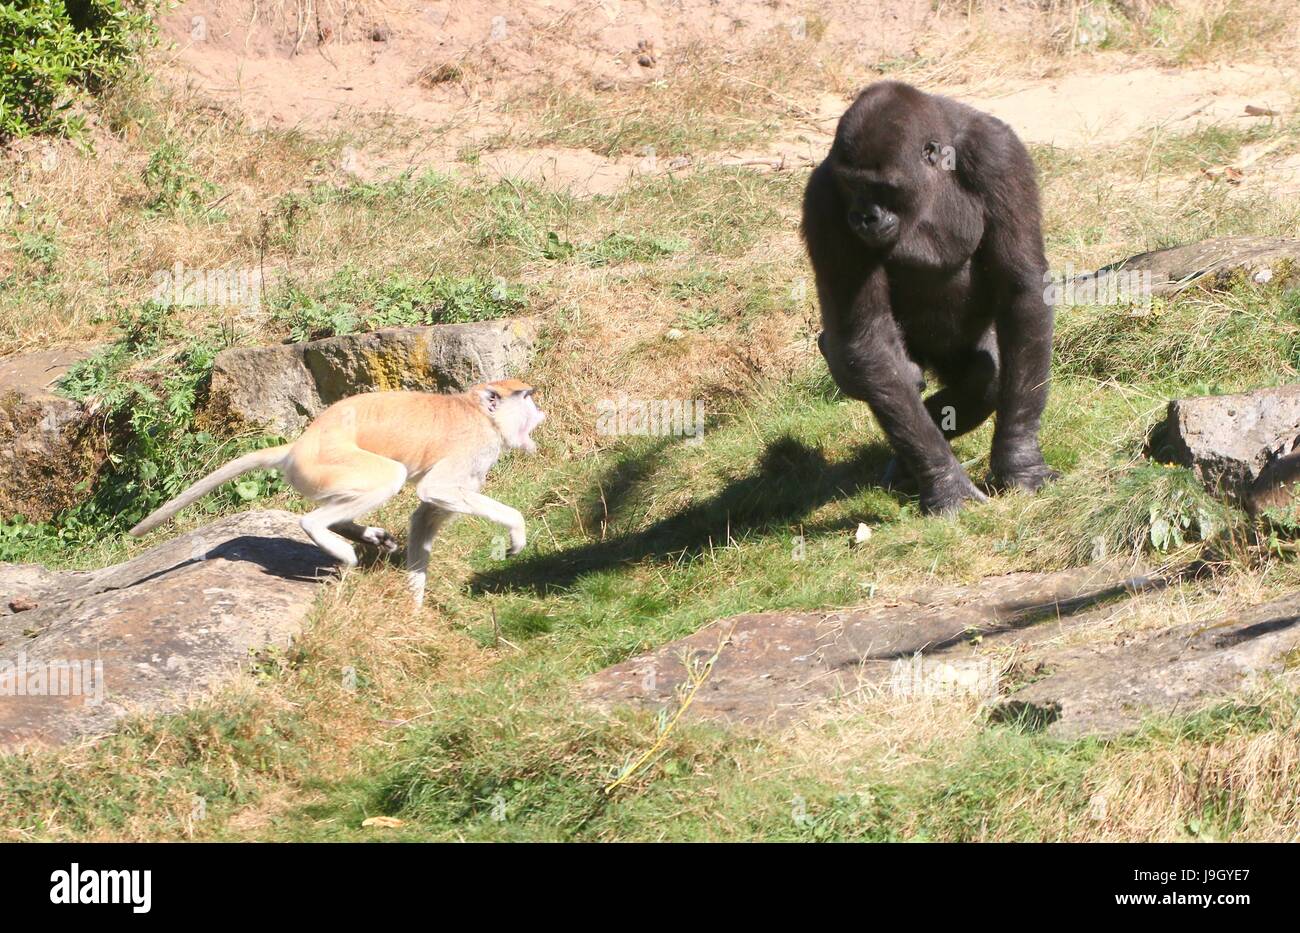 Feisty female African Patas monkey (Erythrocebus patas) charging at a young male western lowland Gorilla. Stock Photo